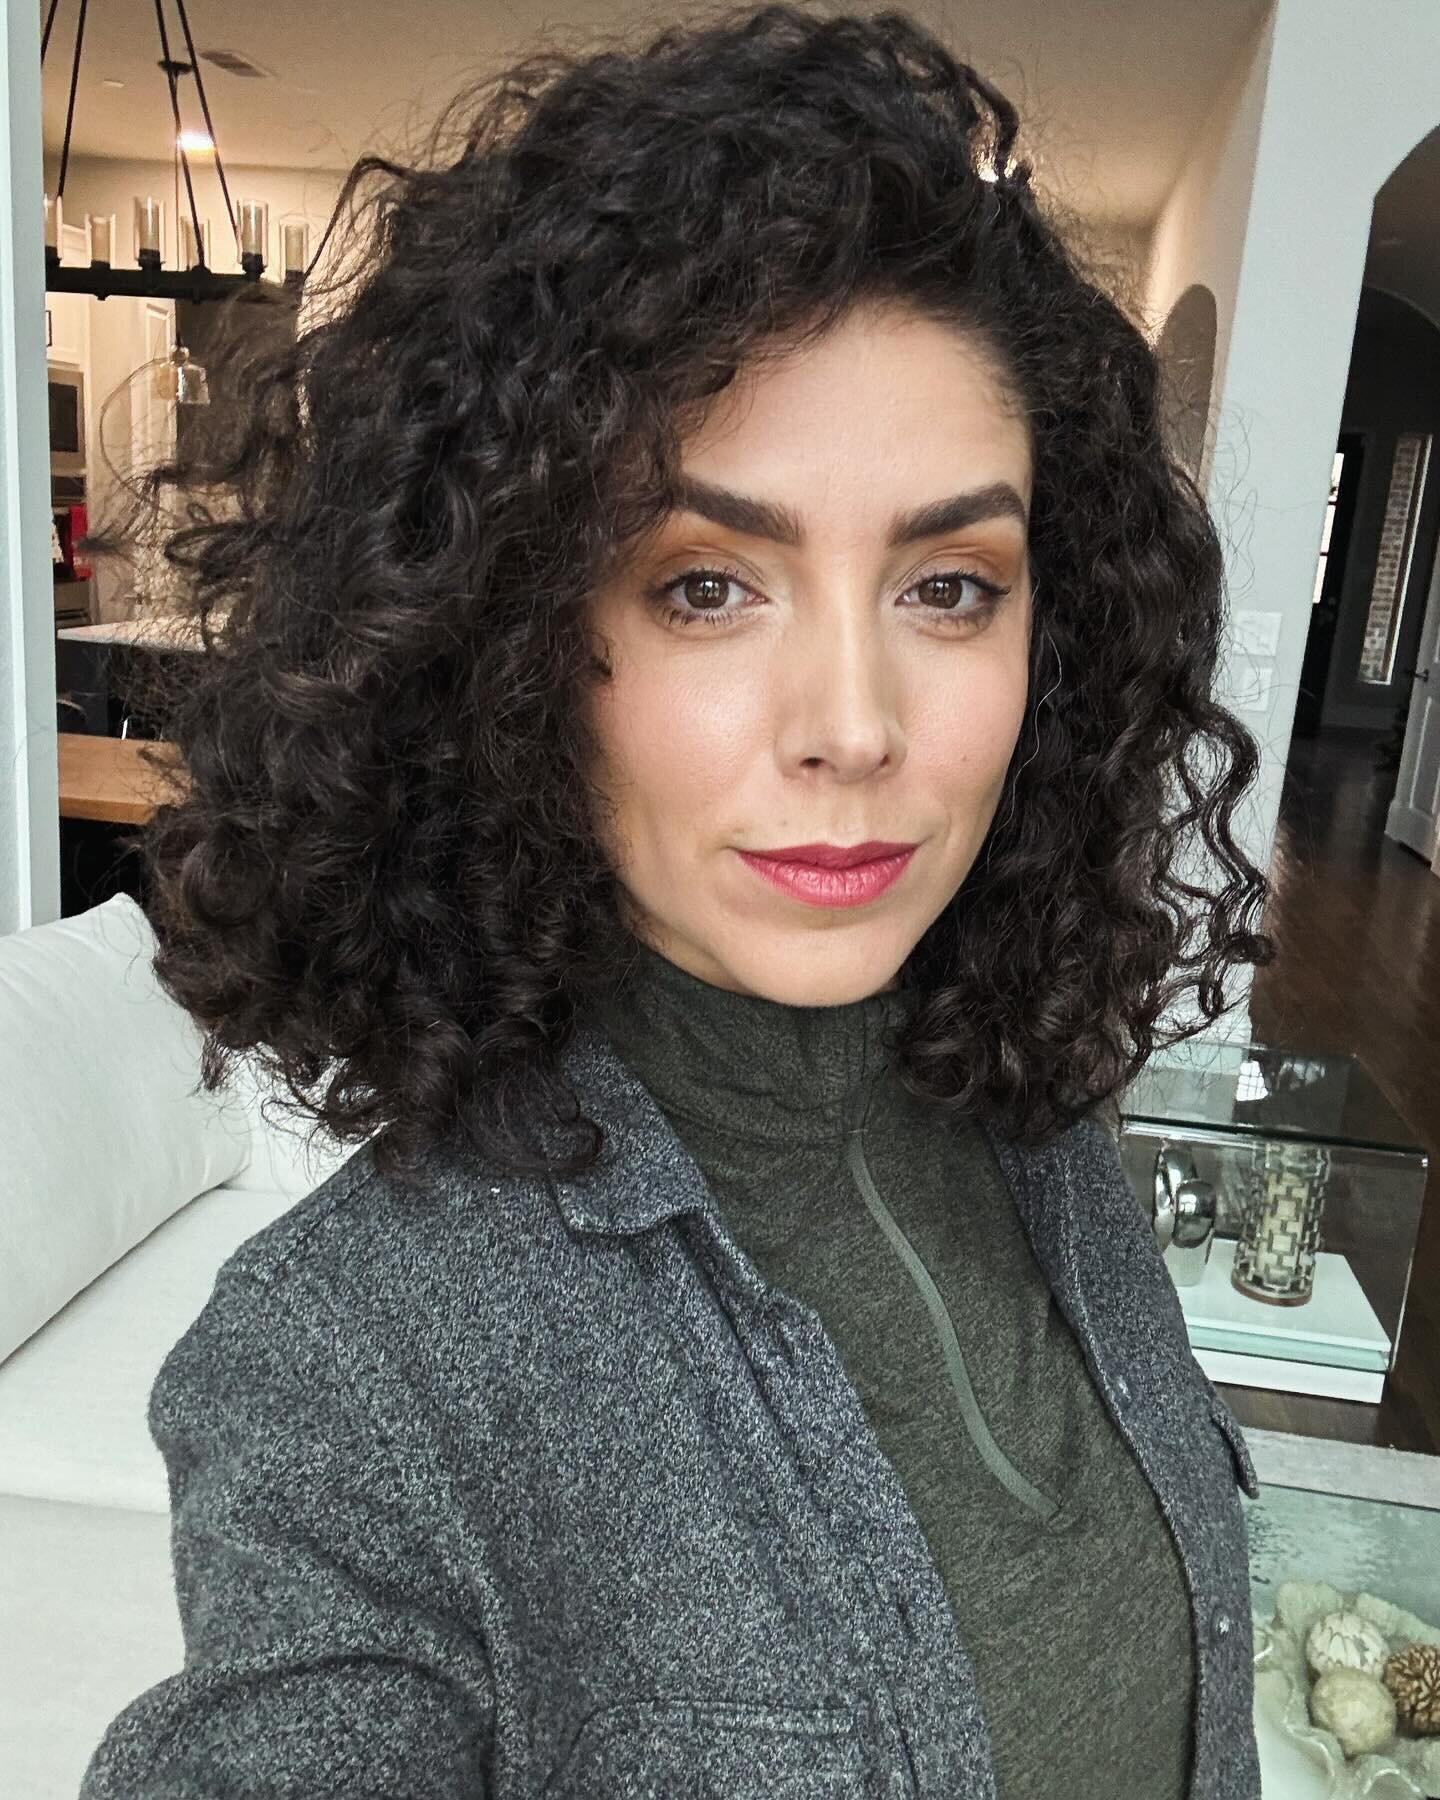 Absolutely loved working with Juliana&rsquo;s gorgeous curls! Follow her @ju.araes creator of &ldquo;Free, Light, and Loose&rdquo; for dream curls. #curlyhair #curly #curlyhairstyles #curls #curly